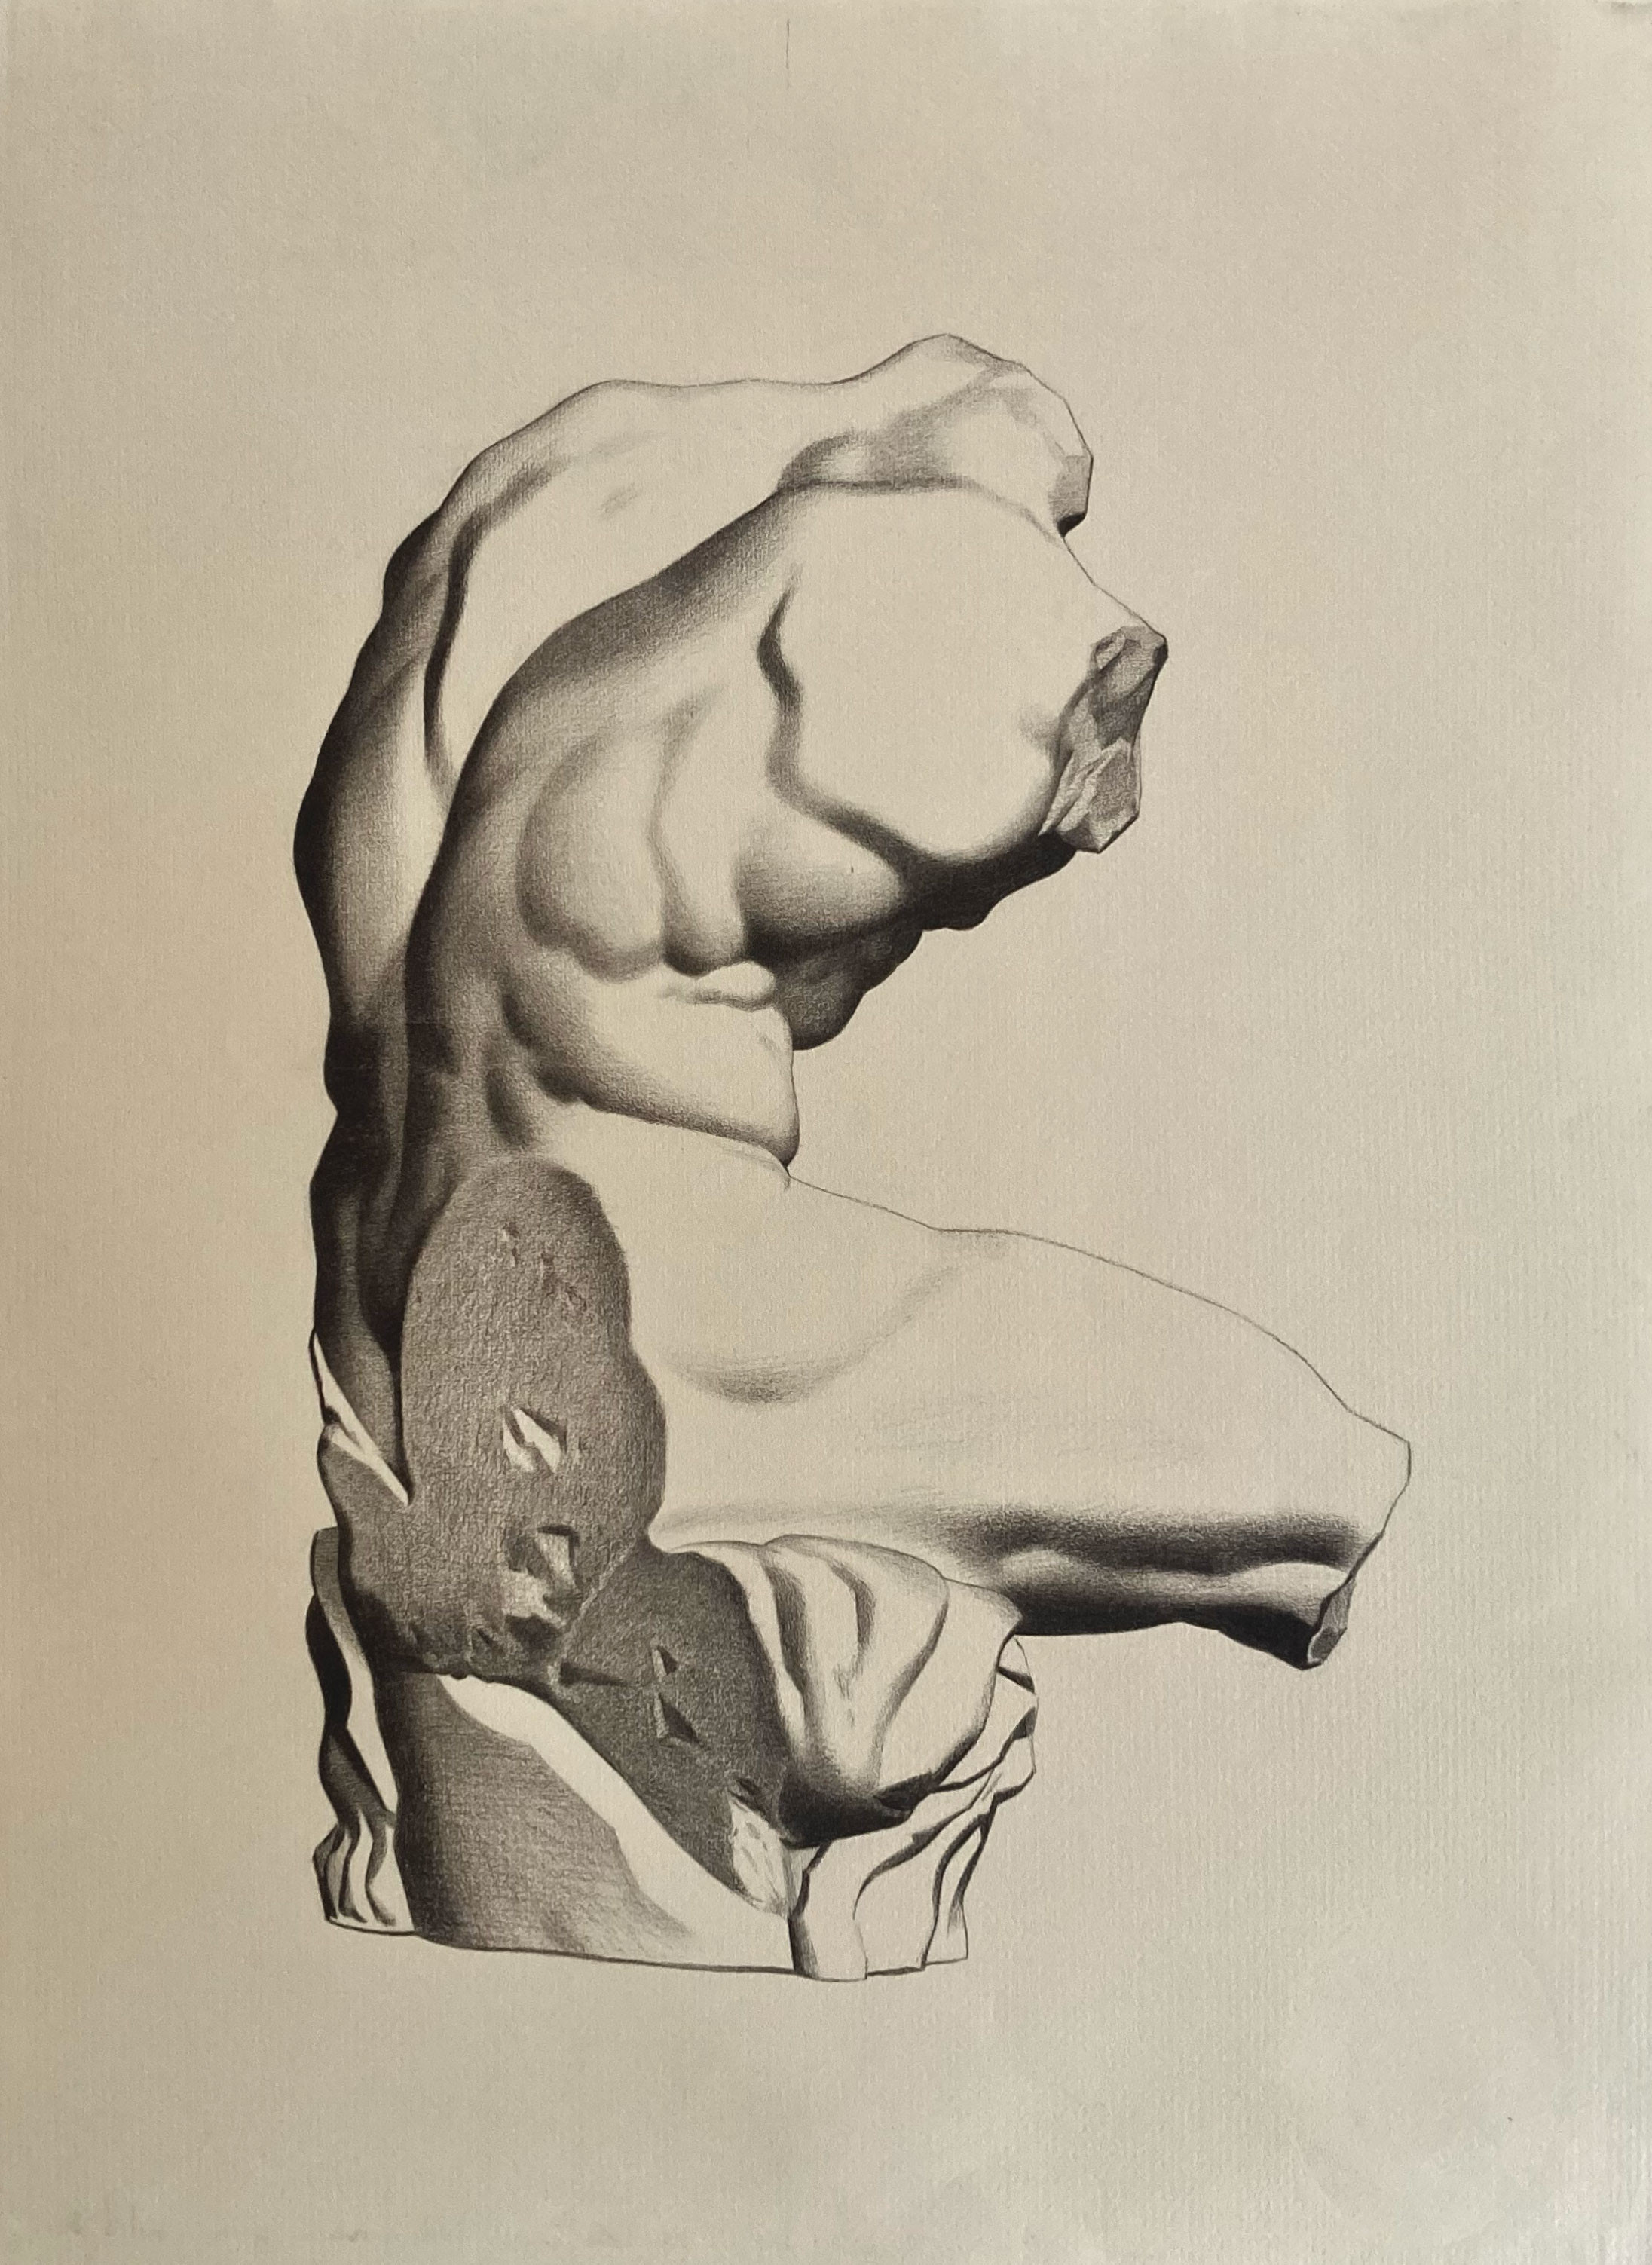 Belvedere Torso
Bargue drawing
Nitram charcoal on toned Roma paper
2023